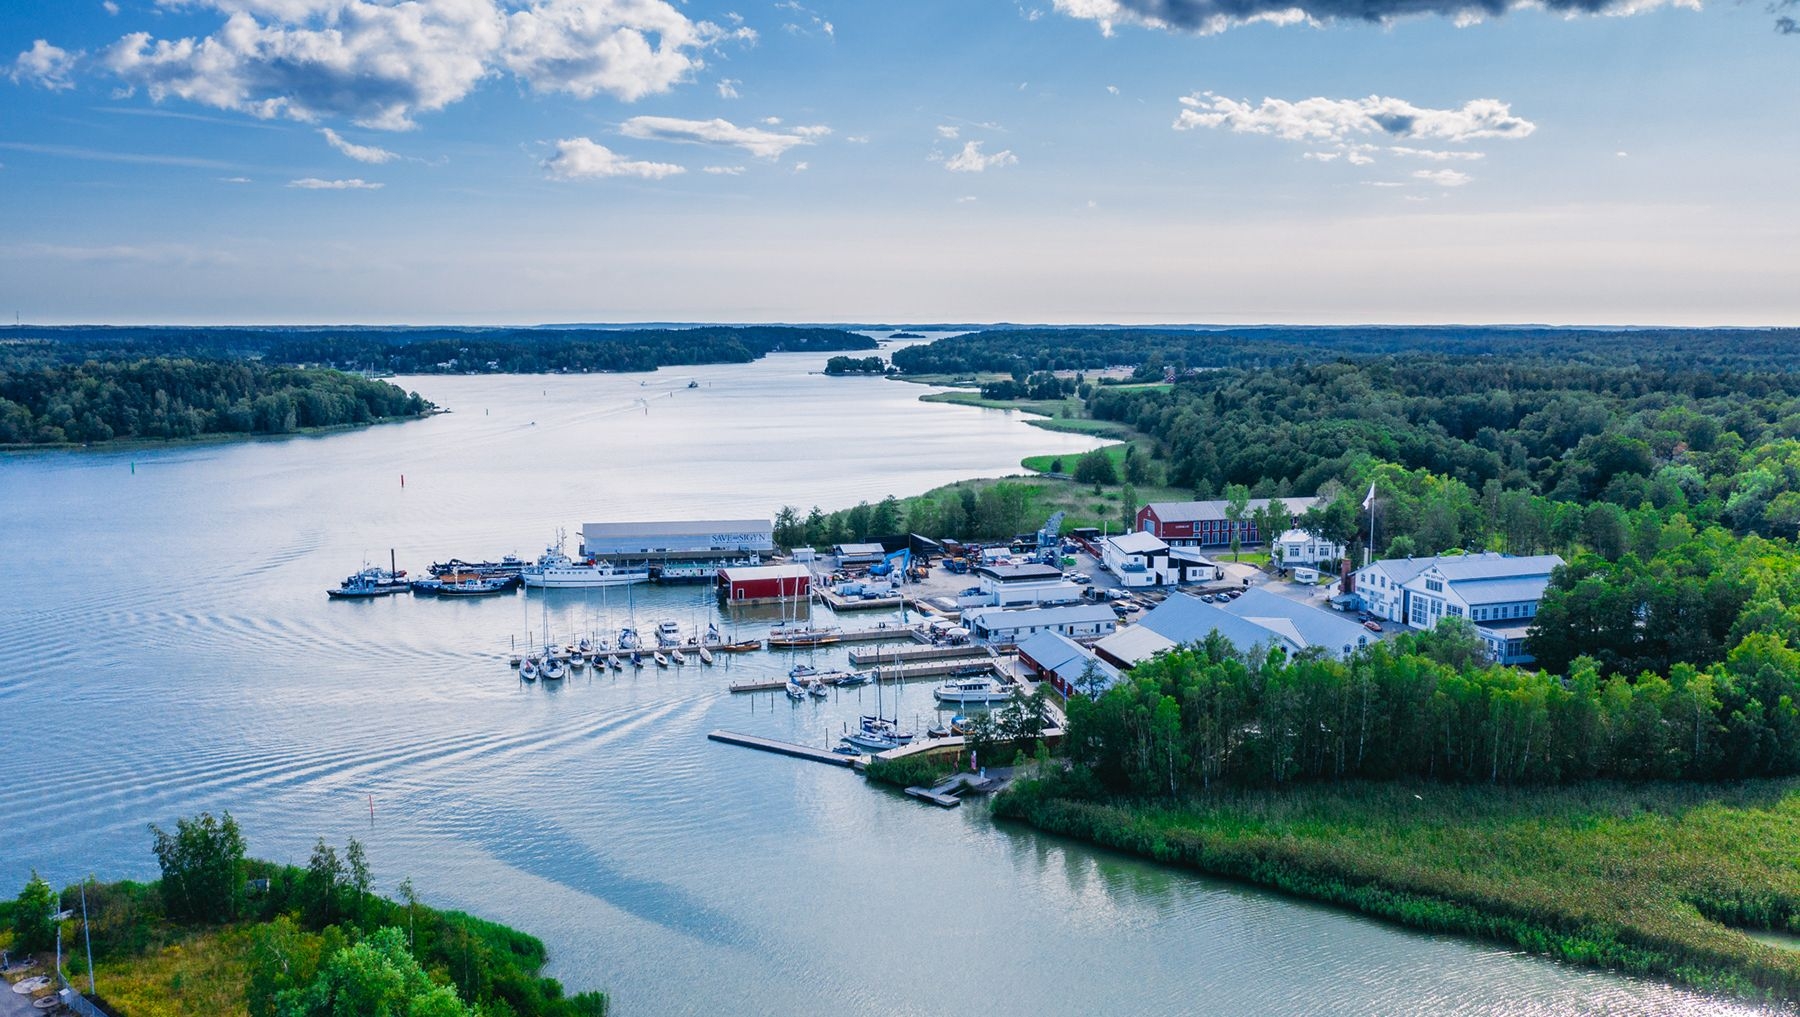 An aerial view of Ruissalo Boatyard on a summer's day.